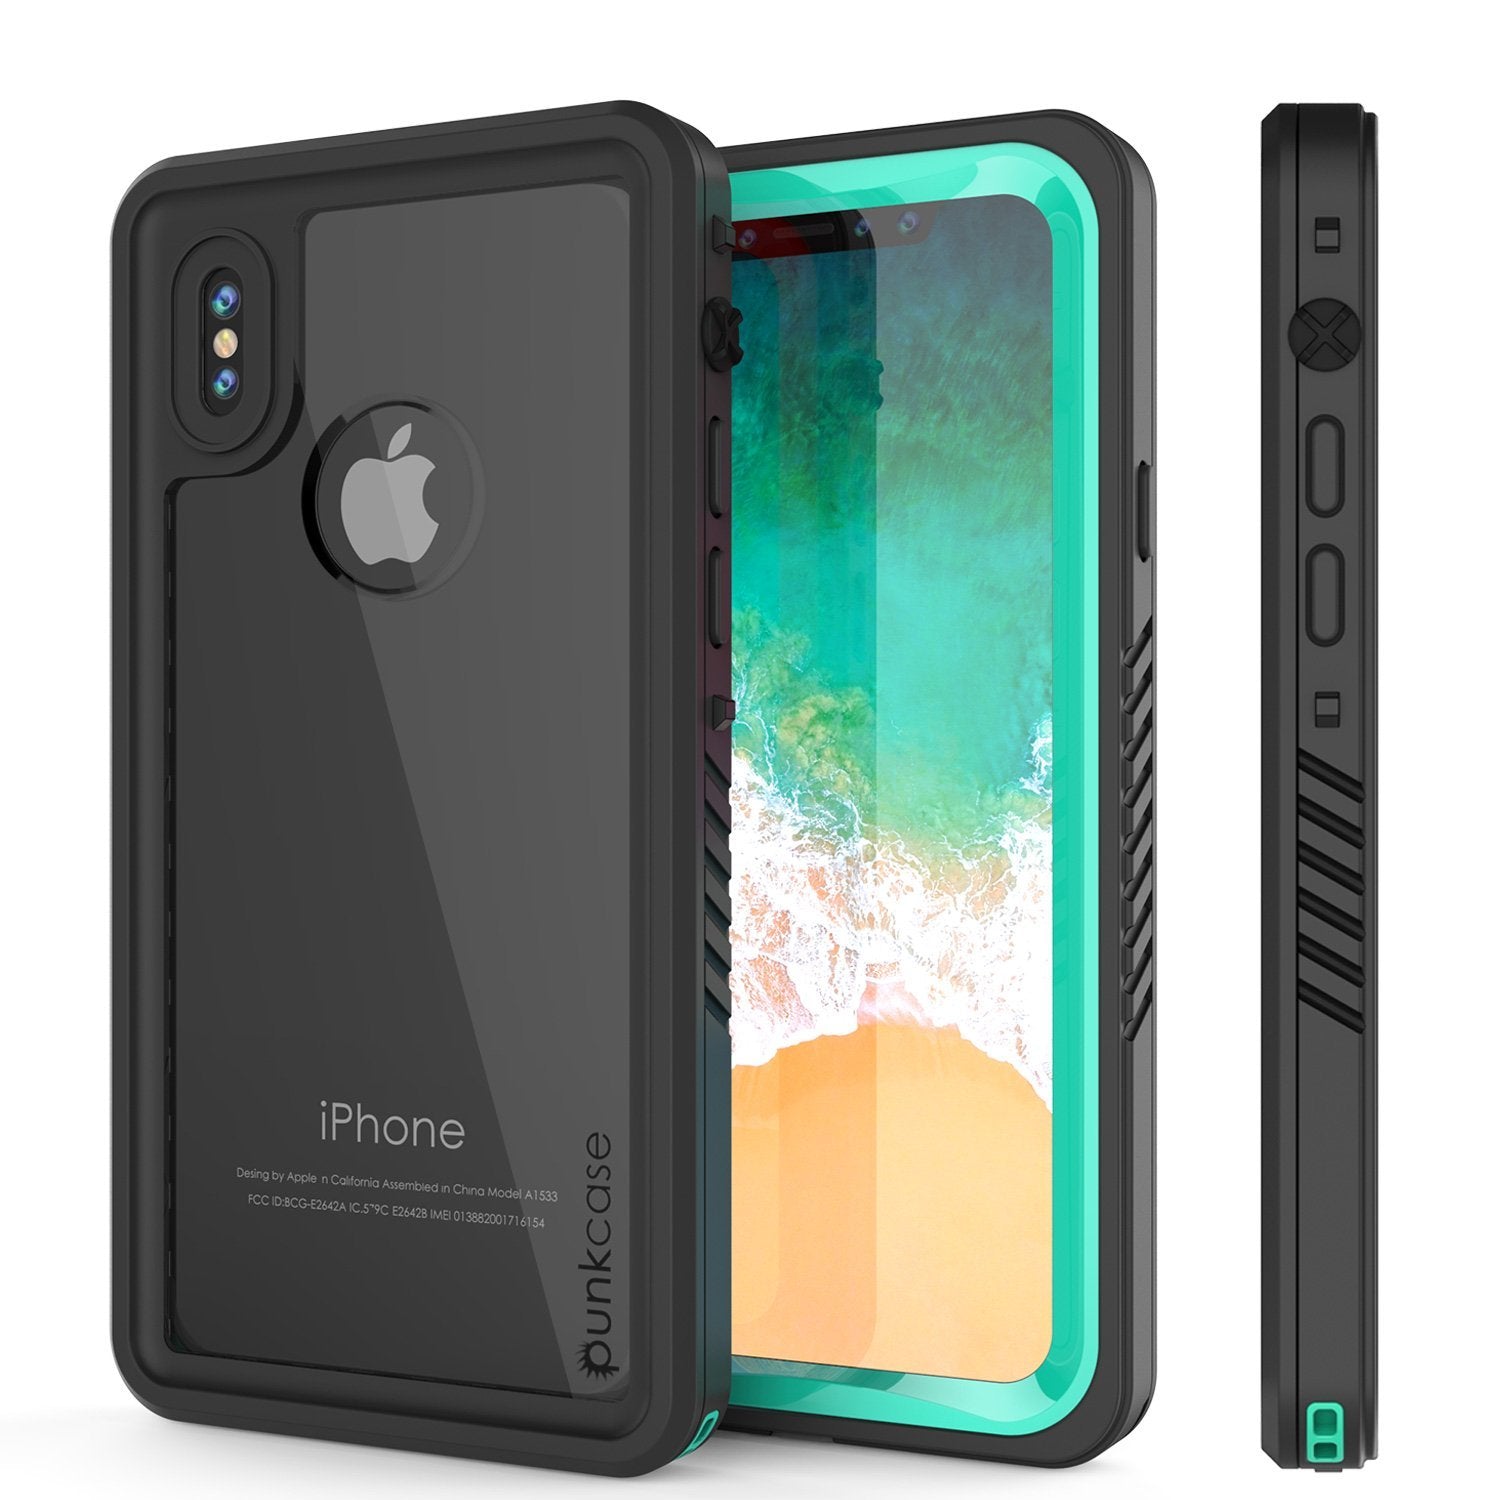 XS Max Waterproof Case, Punkcase Series] Armor Cover W – punkcase